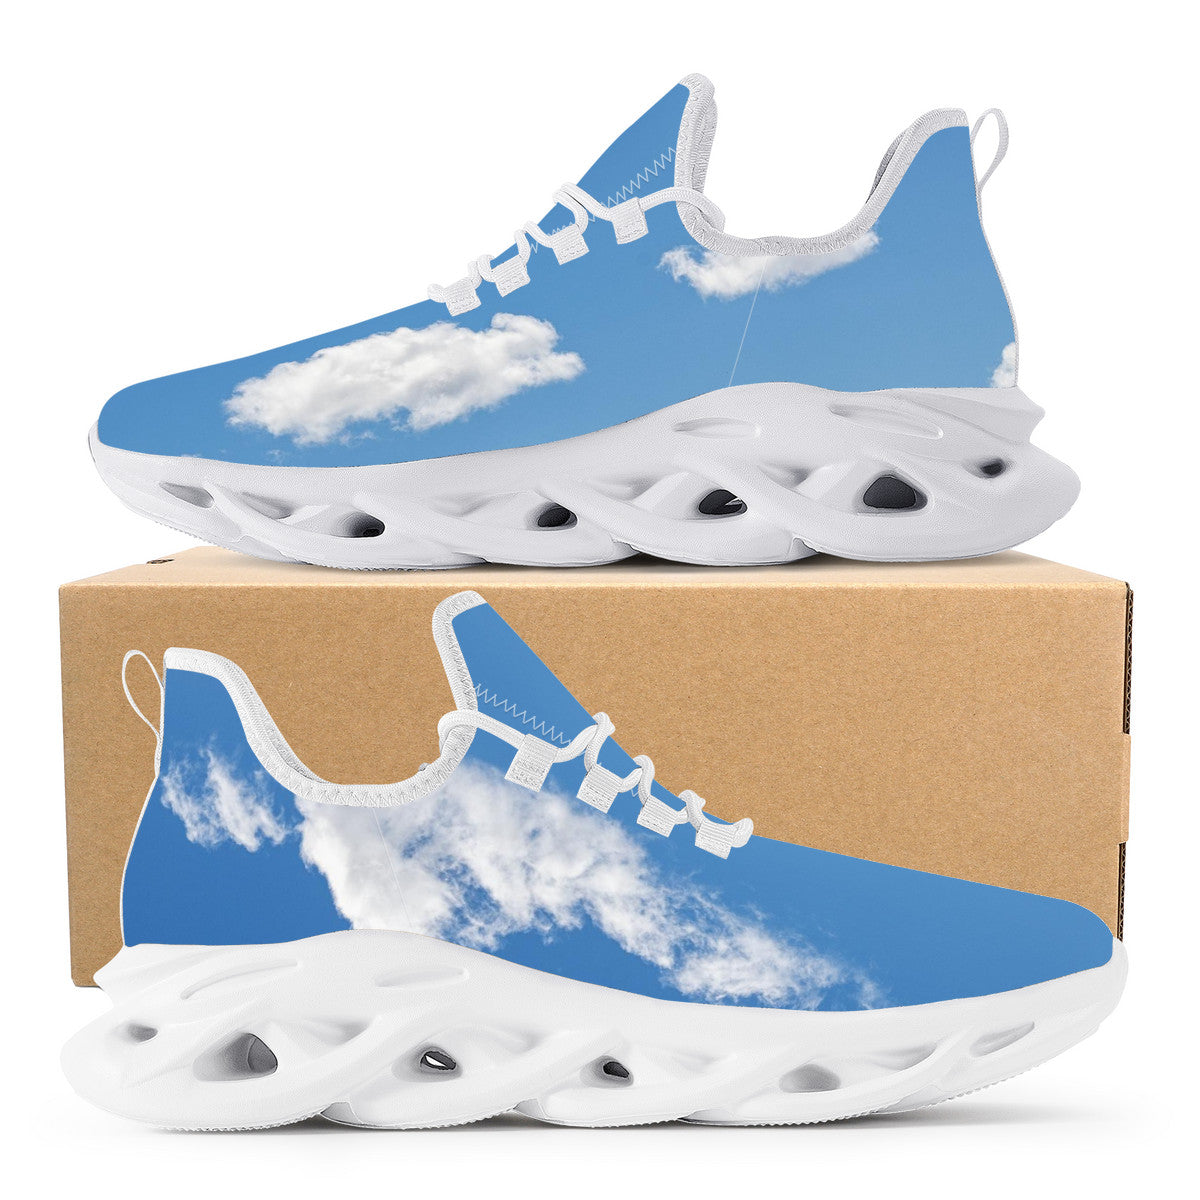 Clouds Running Shoes